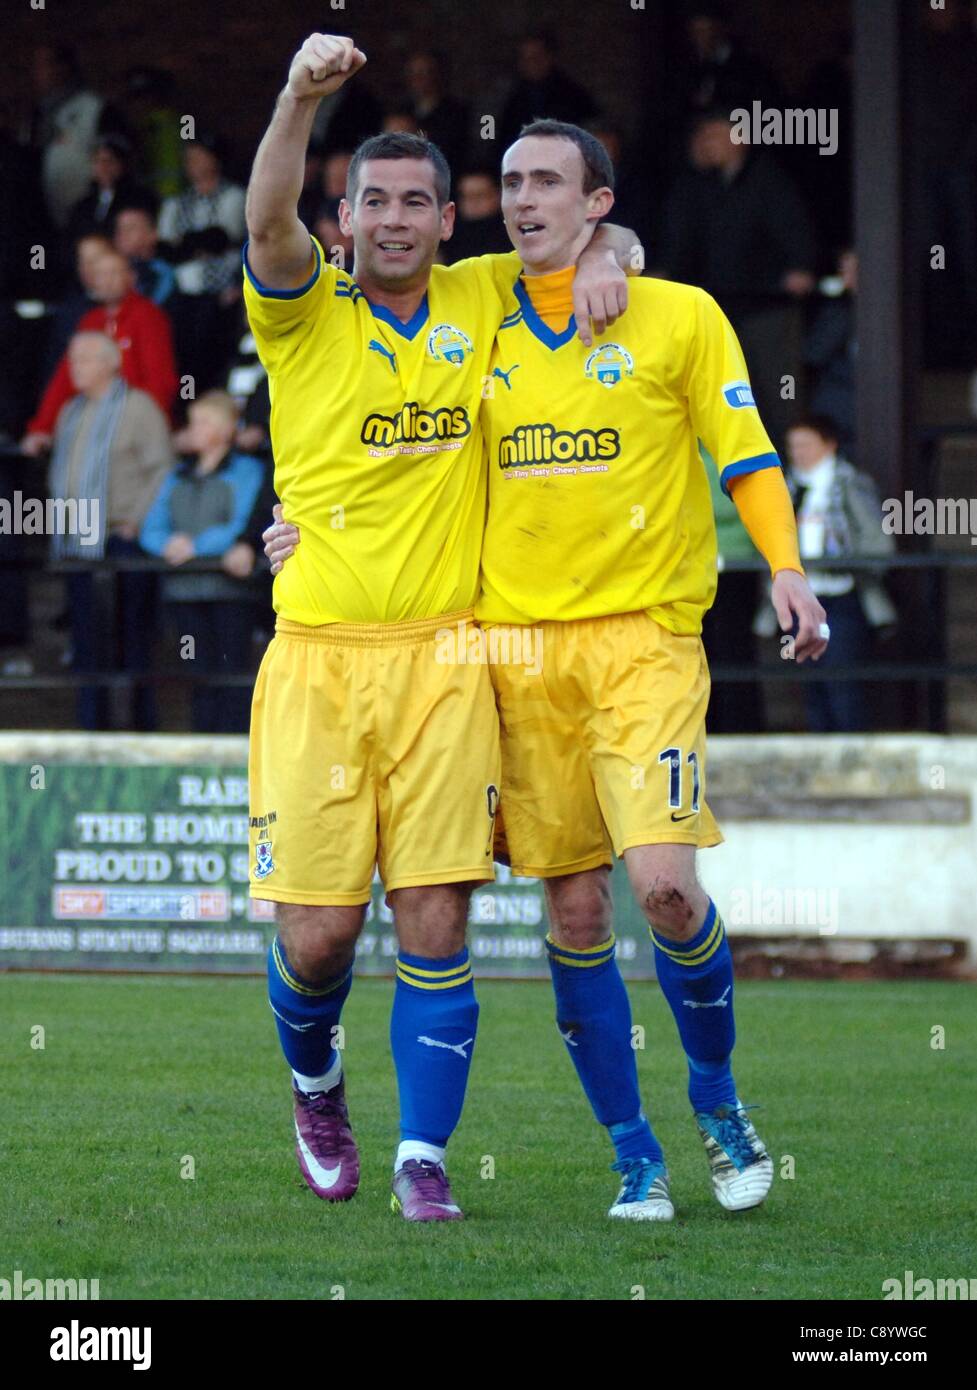 Celebration. Greenock Morton gaolscorer David O'Brien (No. 11) celebrates his goal with fellow striker Peter MacDonald in the match that finished 1-0.        Ayr United v Greenock Morton.  Scottish League Division One.  Somerset Park, Ayr.  5th November, 2011.          All pictures must be cred Stock Photo